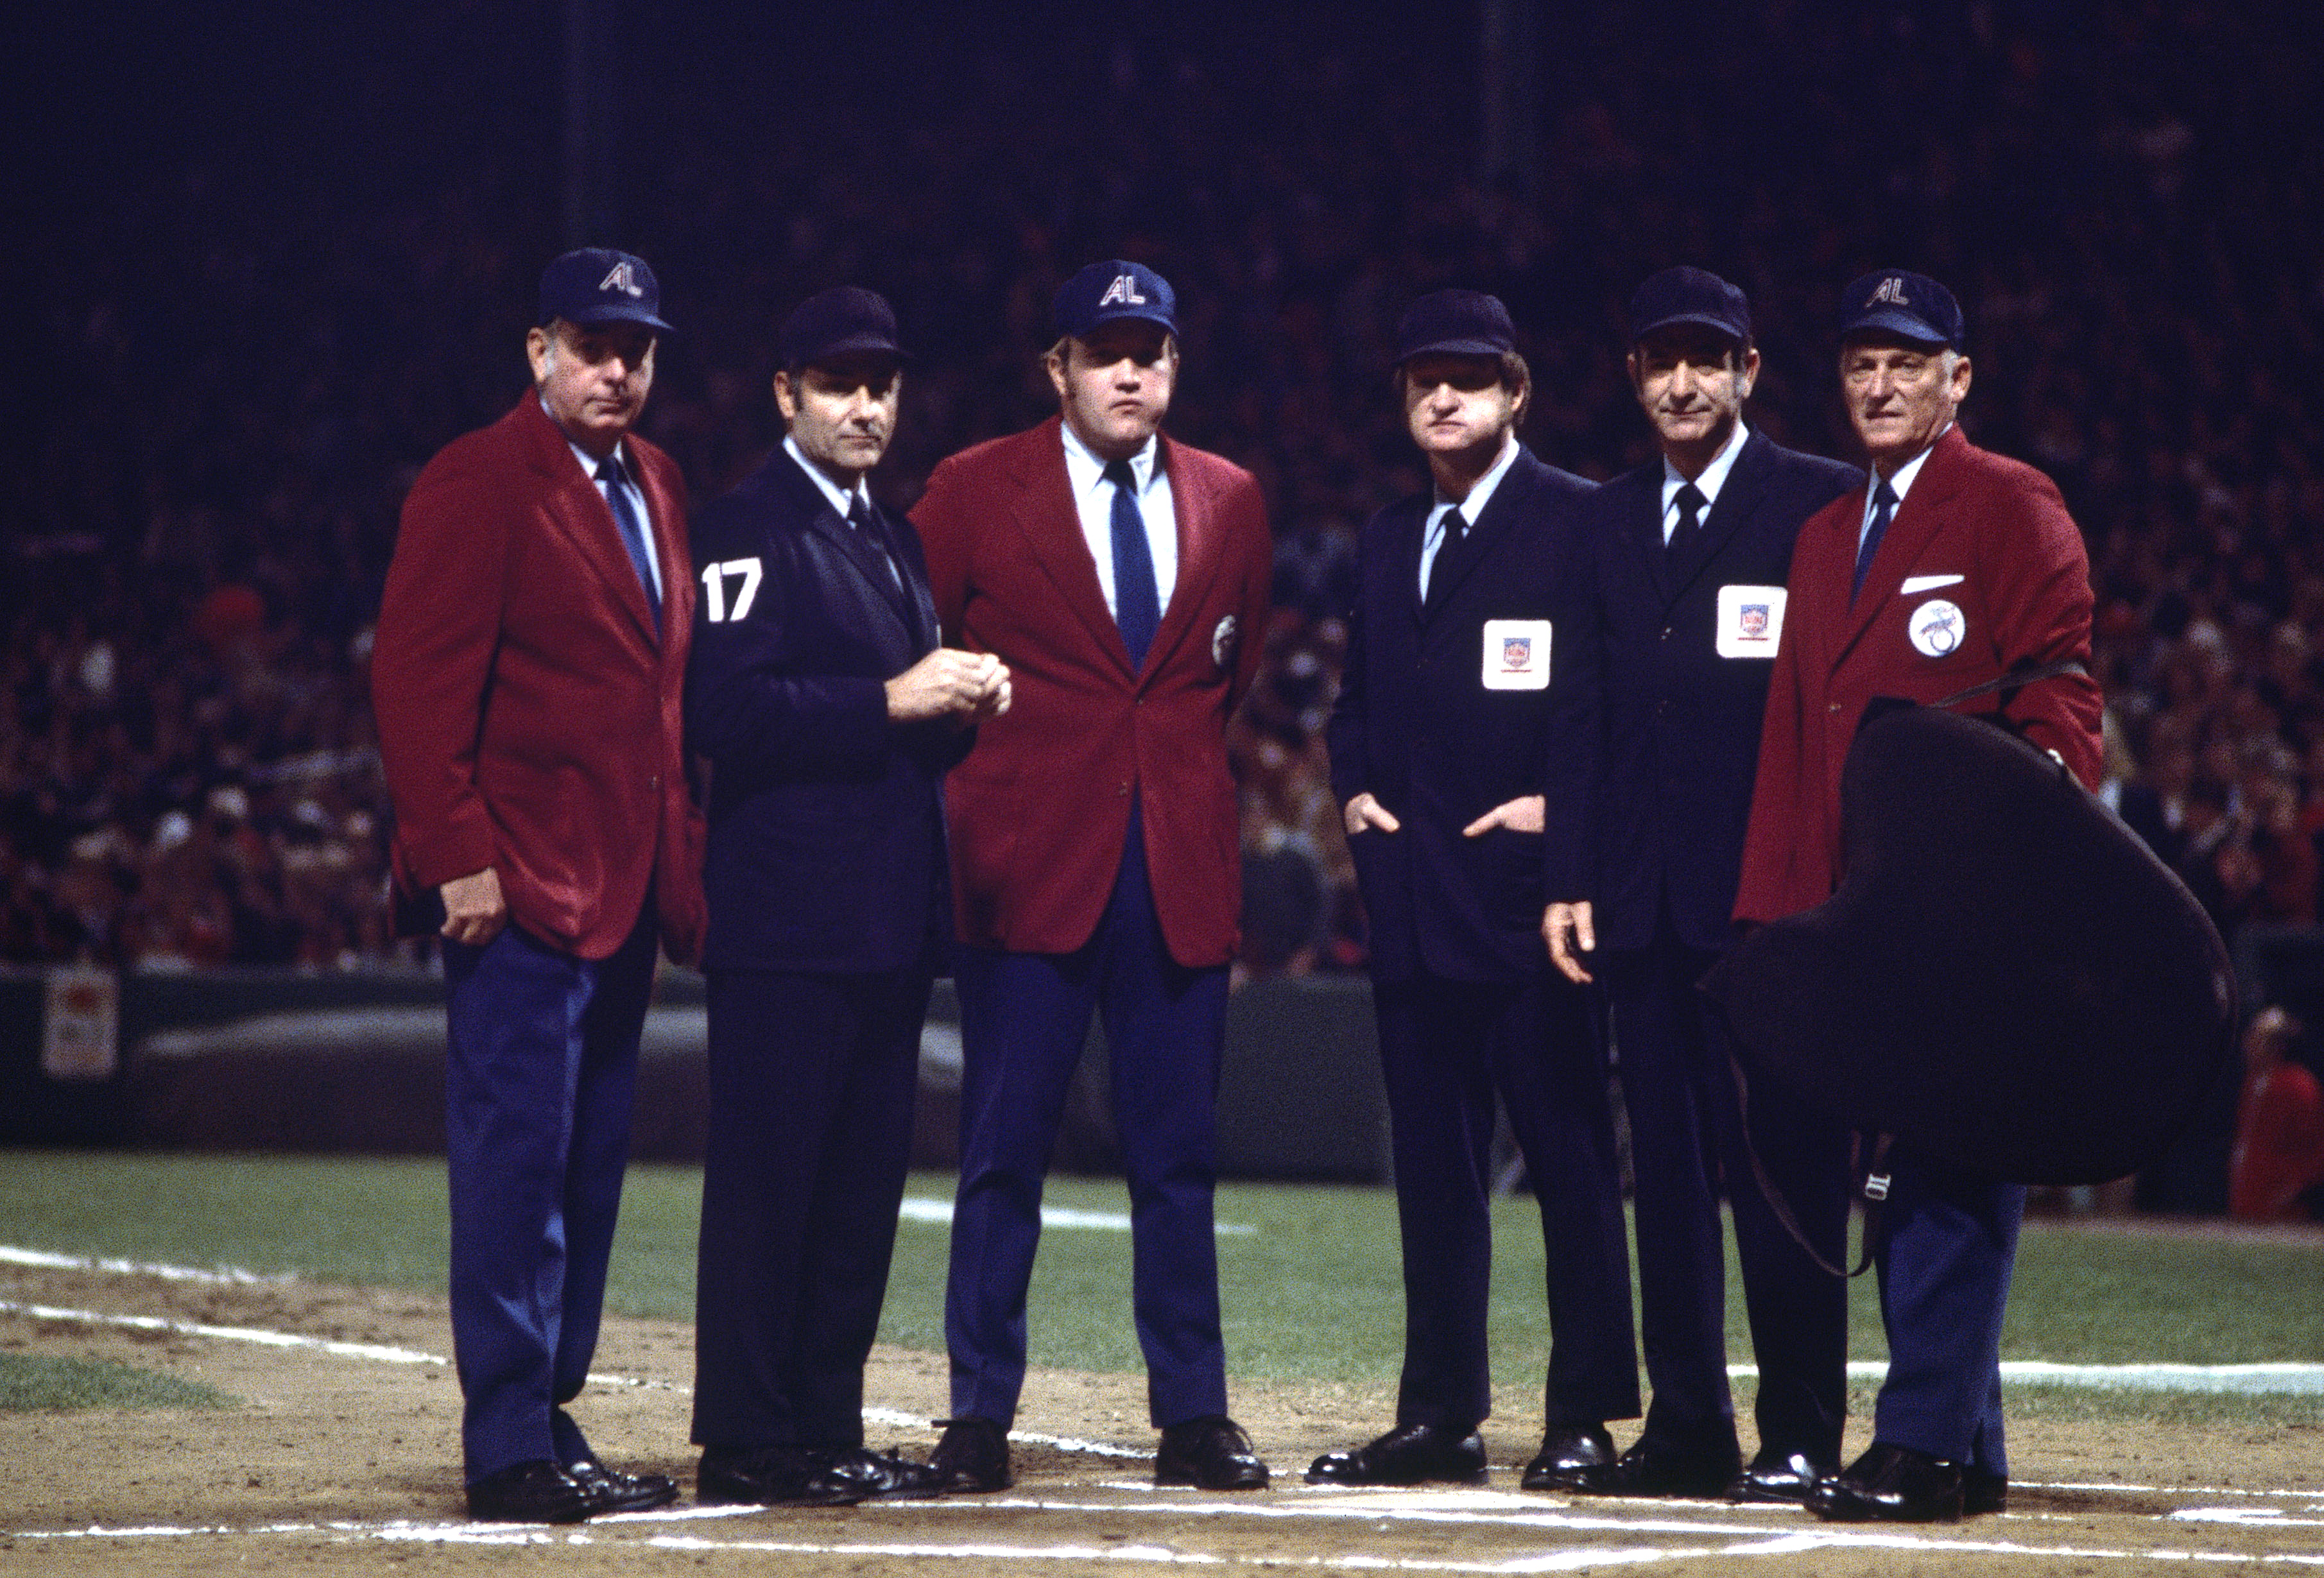 In 1973, new fashion for baseball umpires was strictly a judgment